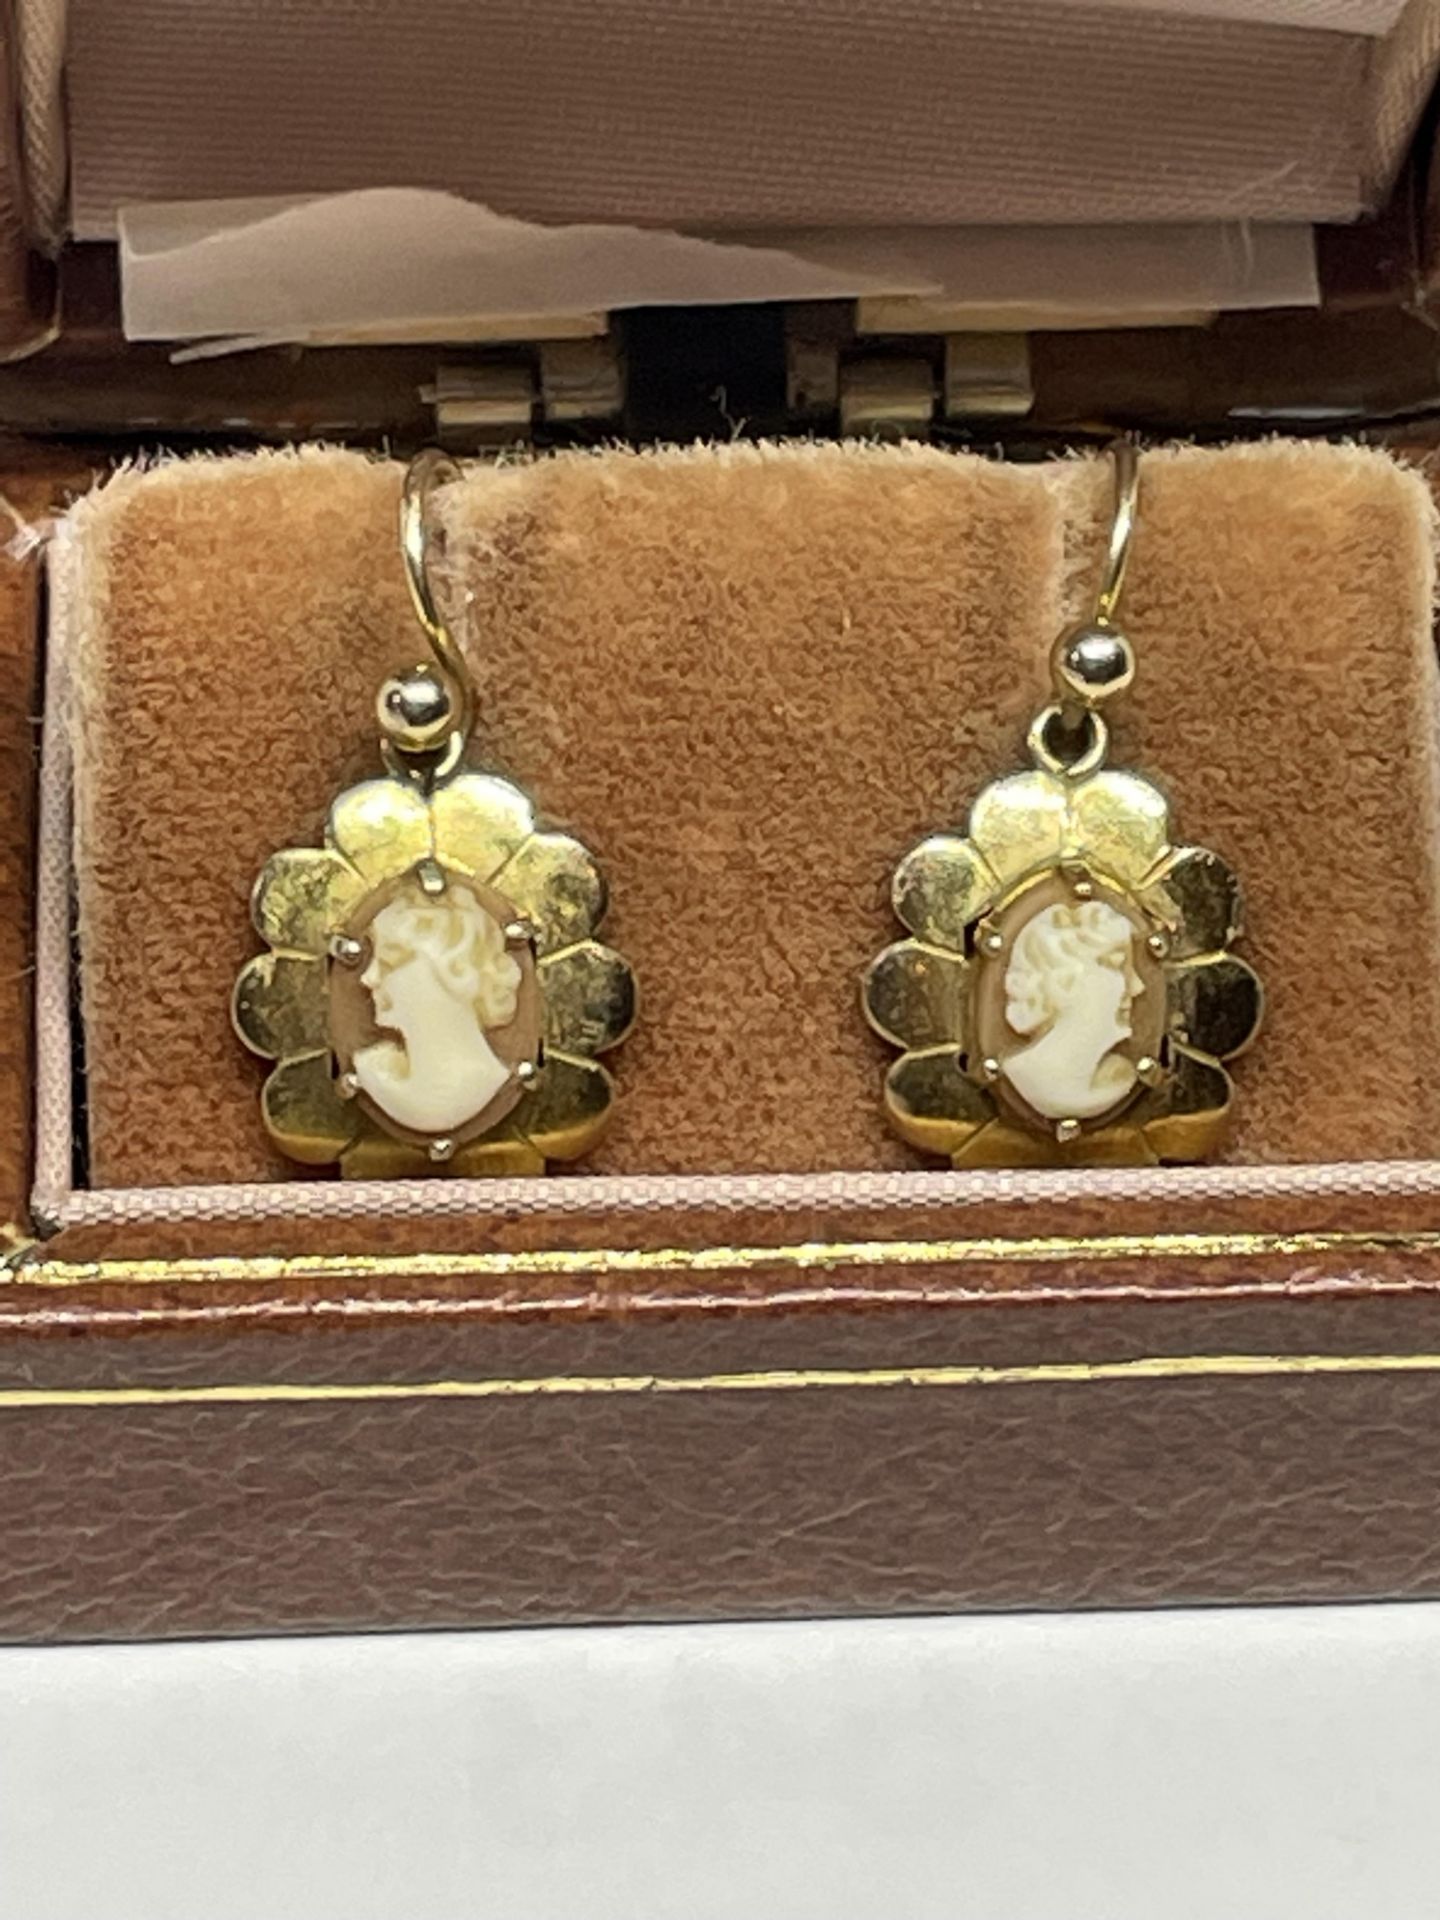 A PAIR OF MARKED 375 GOLD EARRINGS WITH CAMEOS IN A PRESENTATION BOX GROSS WEIGHT 1.87 GRAMS - Image 4 of 4